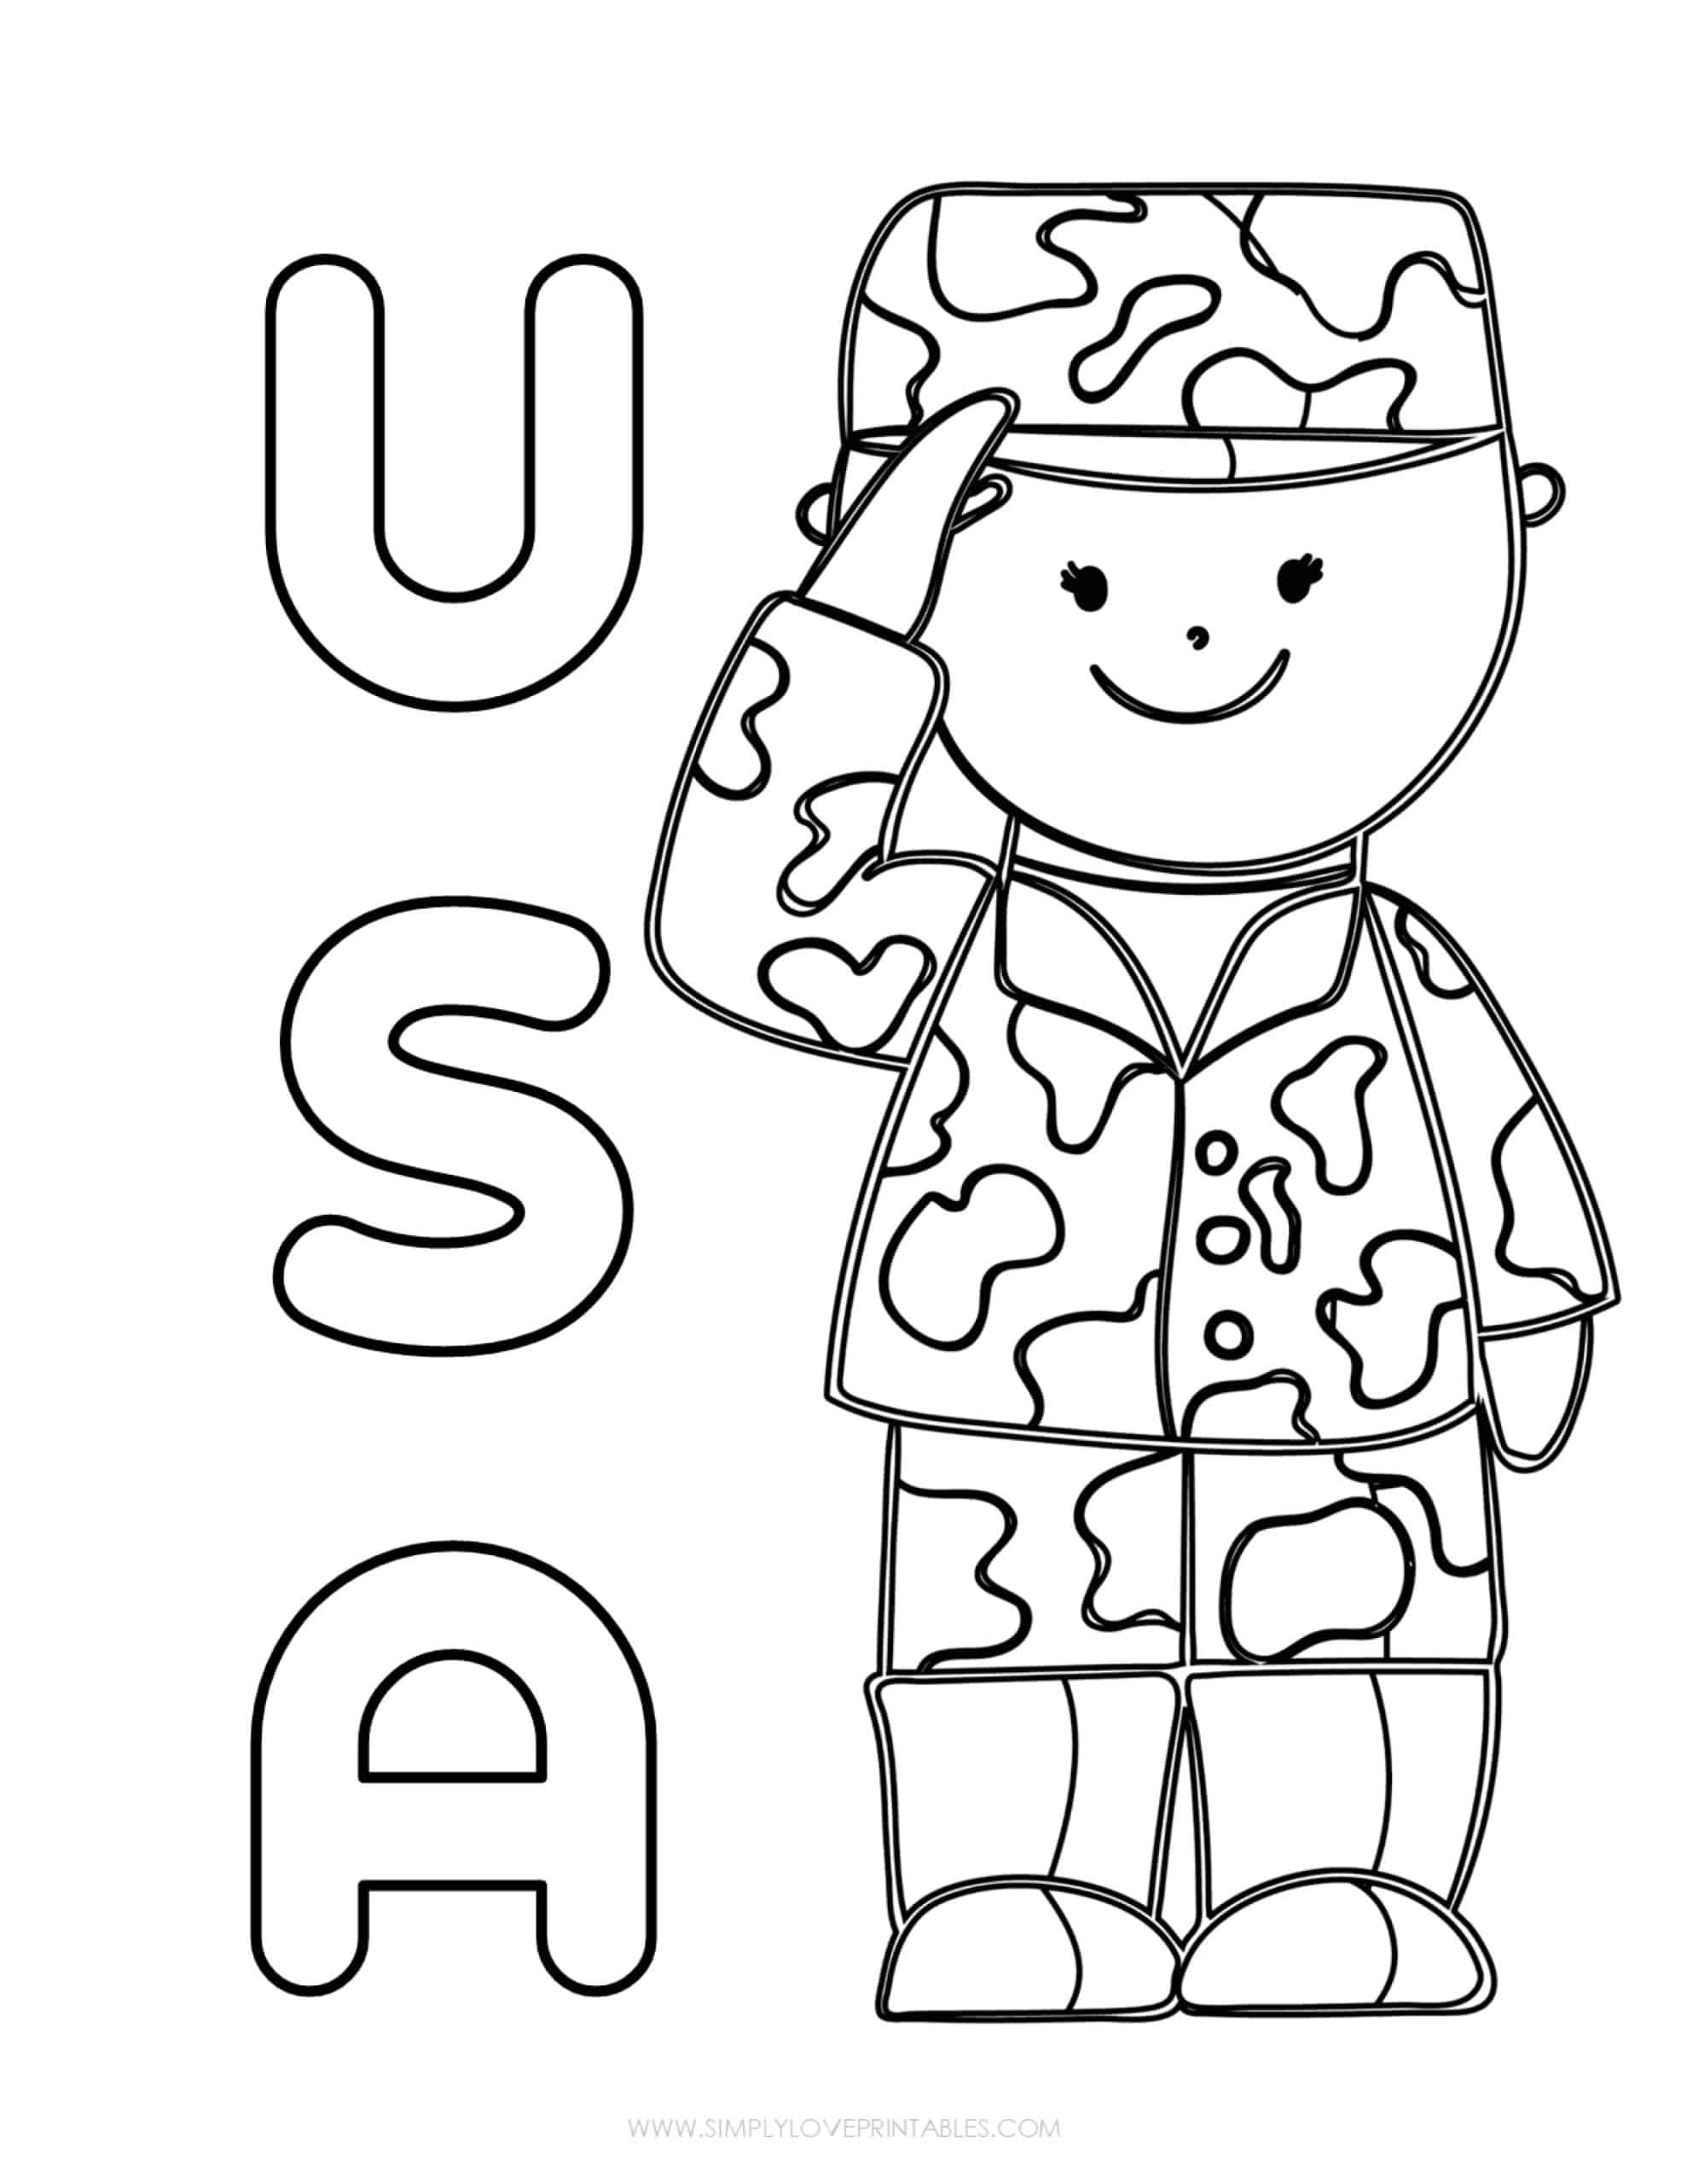 Free memorial day coloring pages simply love printables